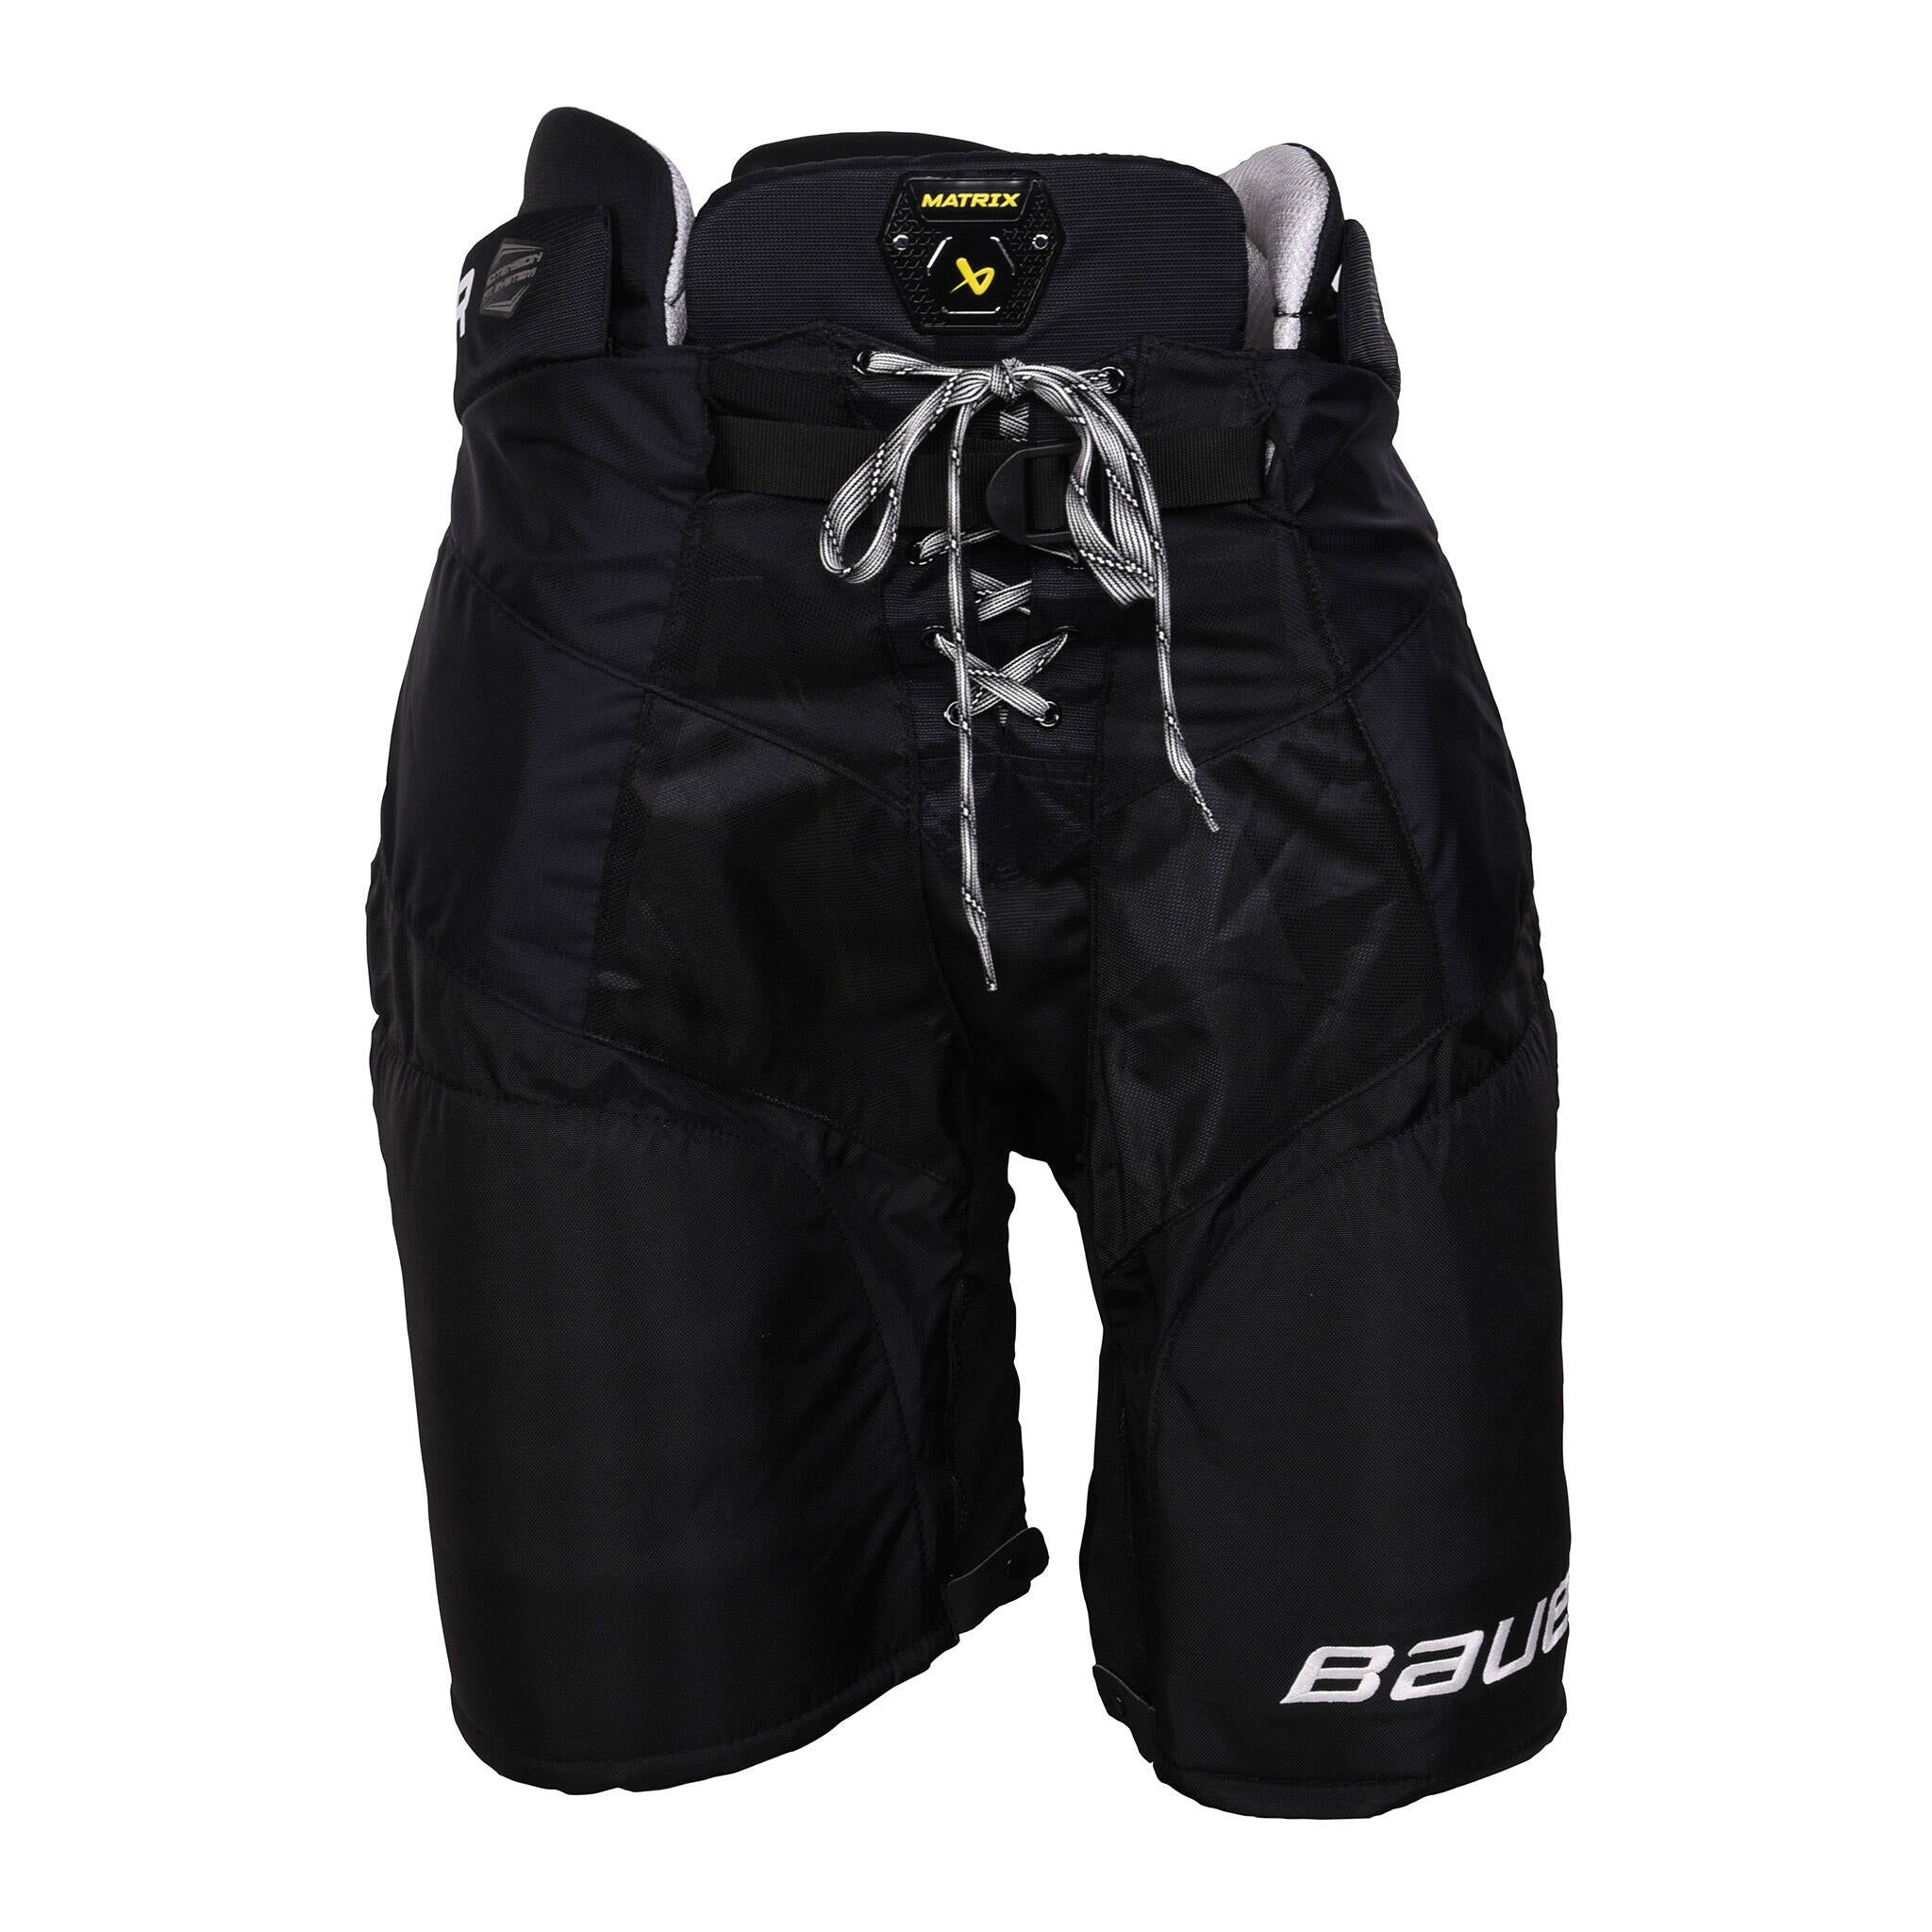 New Bauer Comp Pant WMS M Ice Hockey / Bottoms